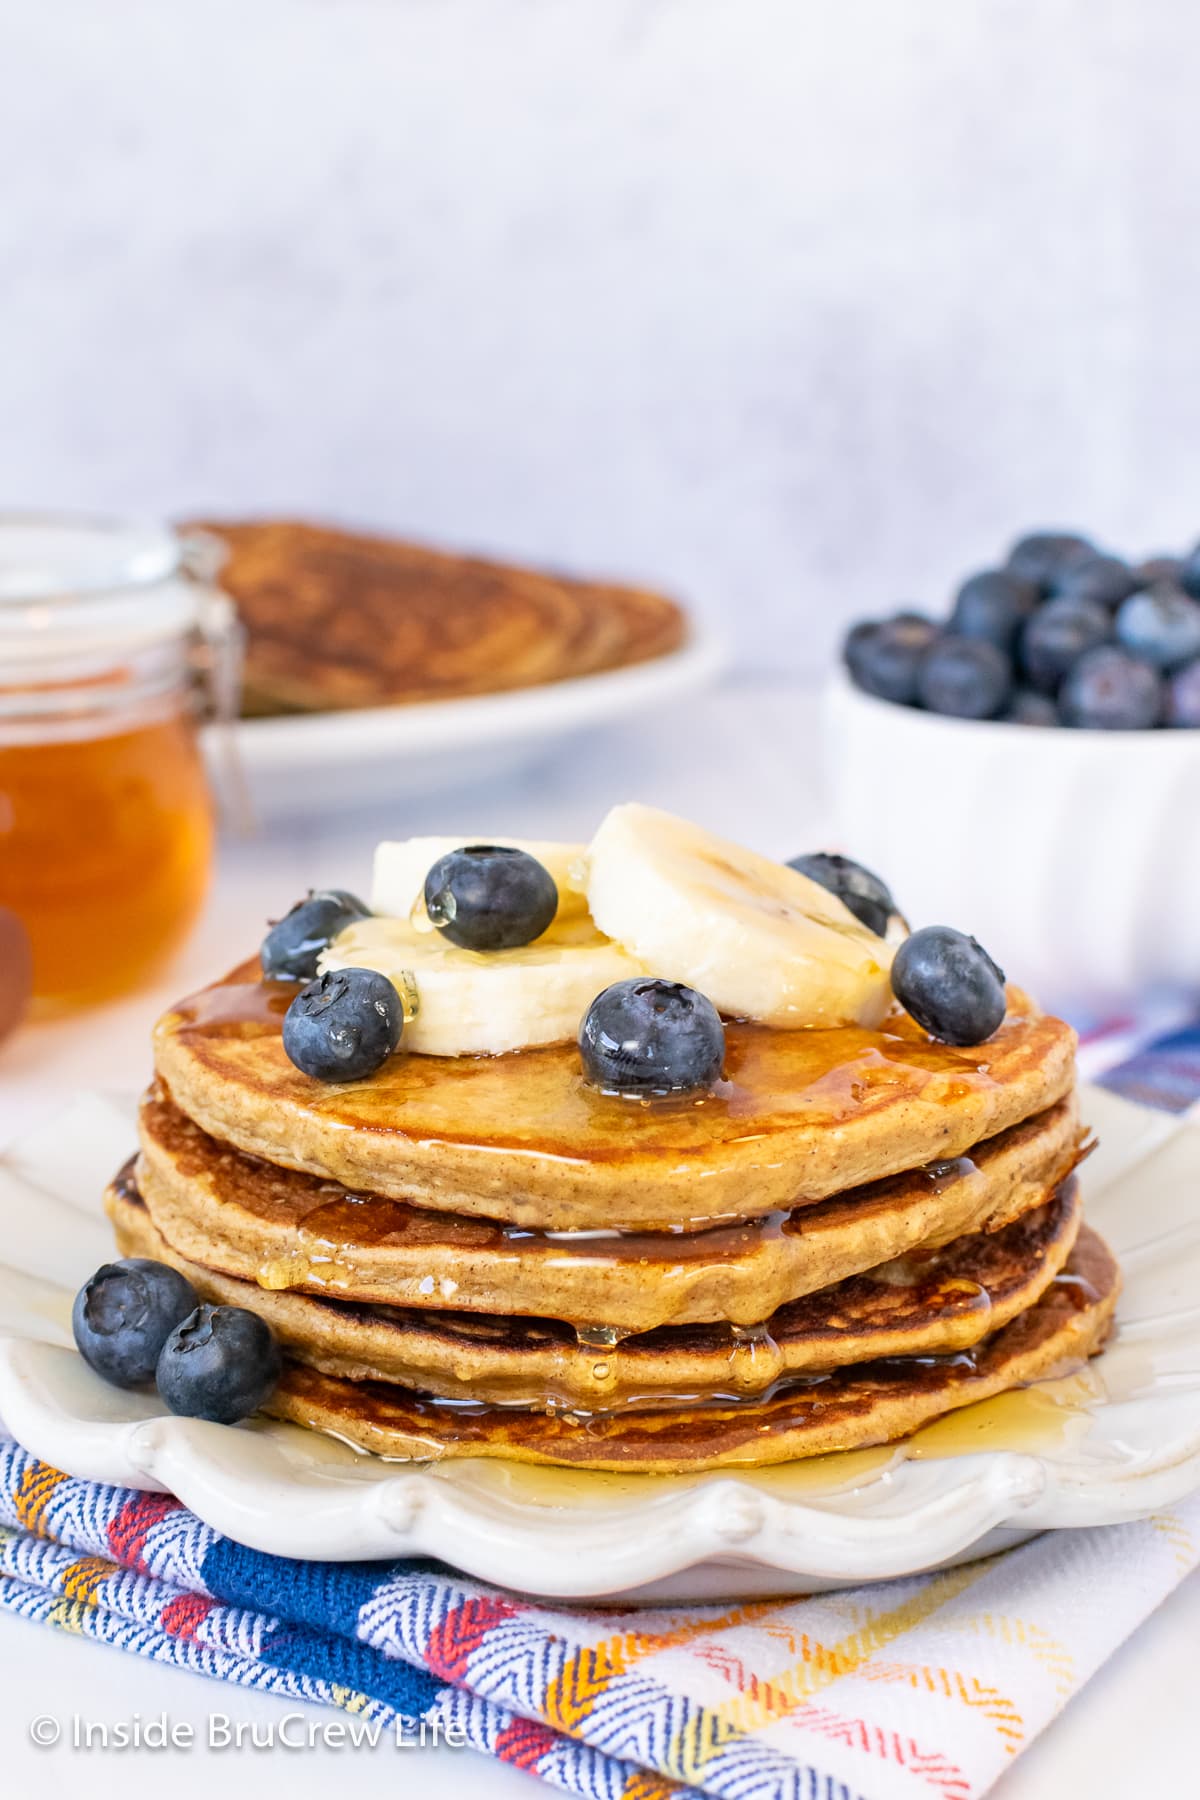 A stack of pancakes on a plate with blueberries and bananas.